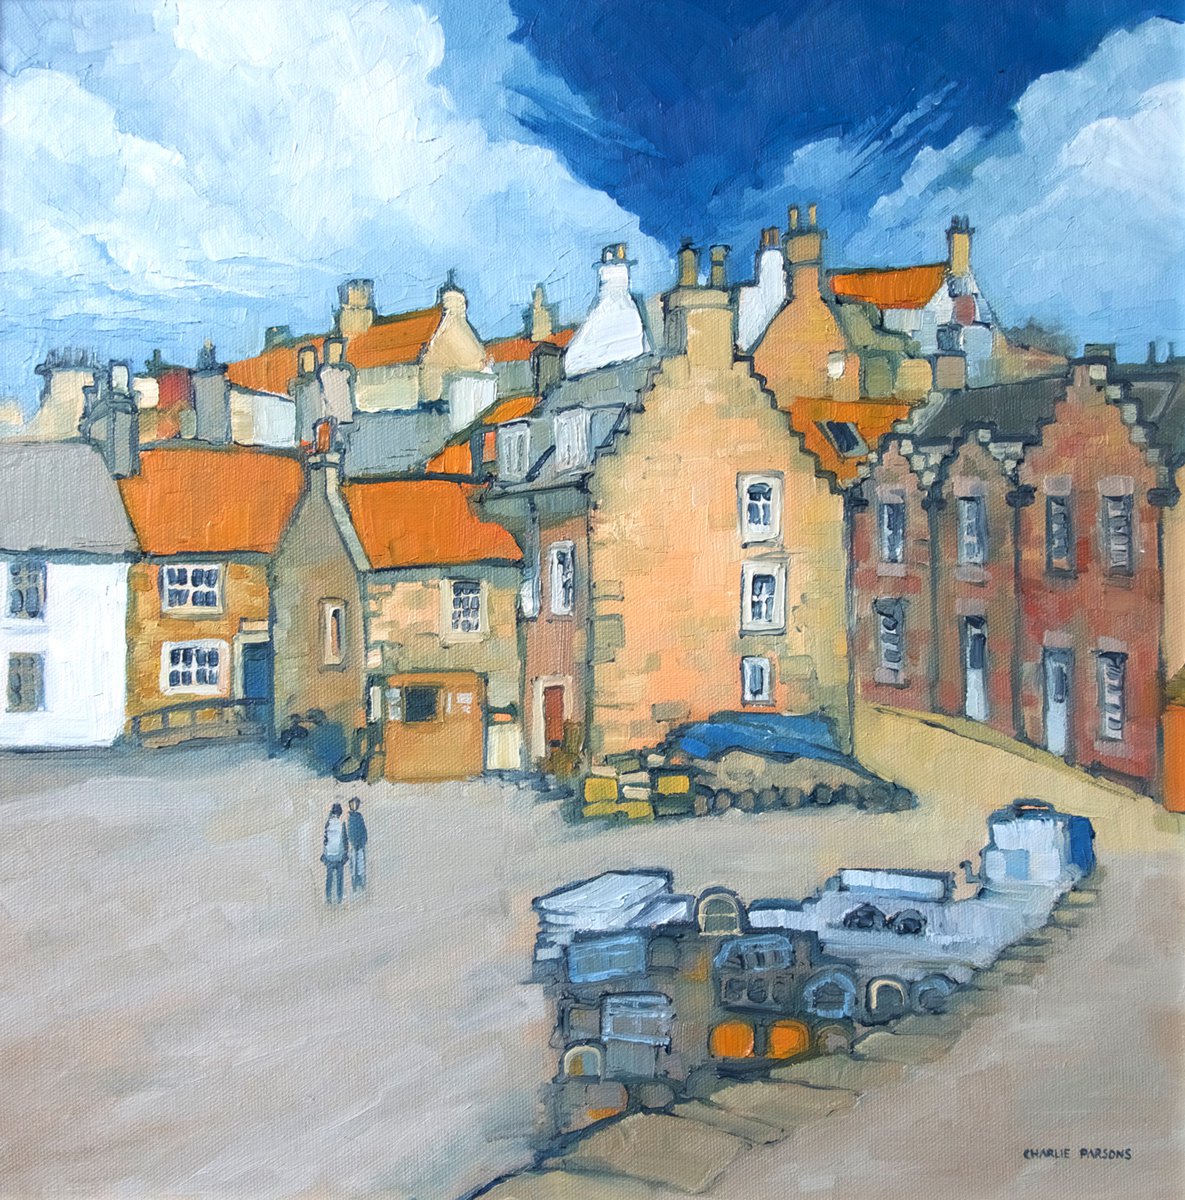 Crail Creels by Charlie Parsons